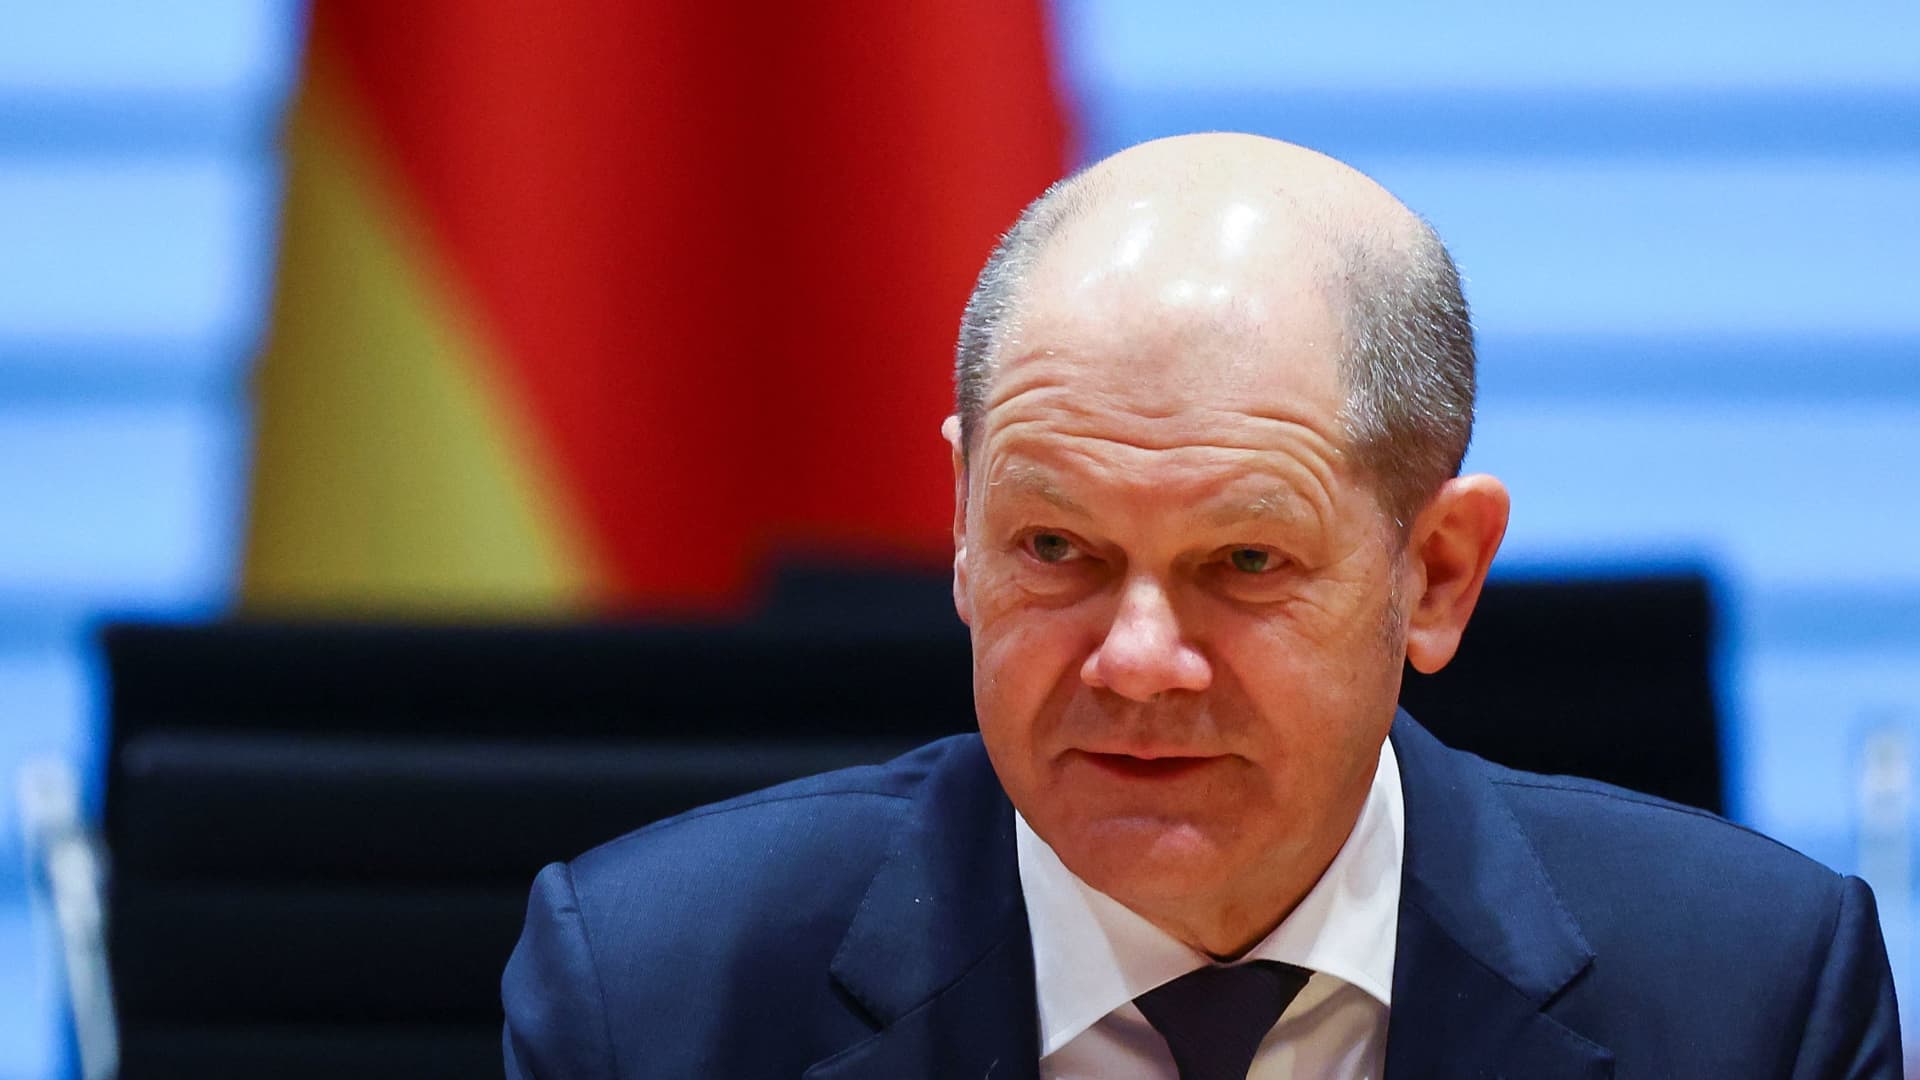 Chancellor Olaf Scholz said Germany is looking to create closer ties with countries that share its values, naming Japan and India, among others.